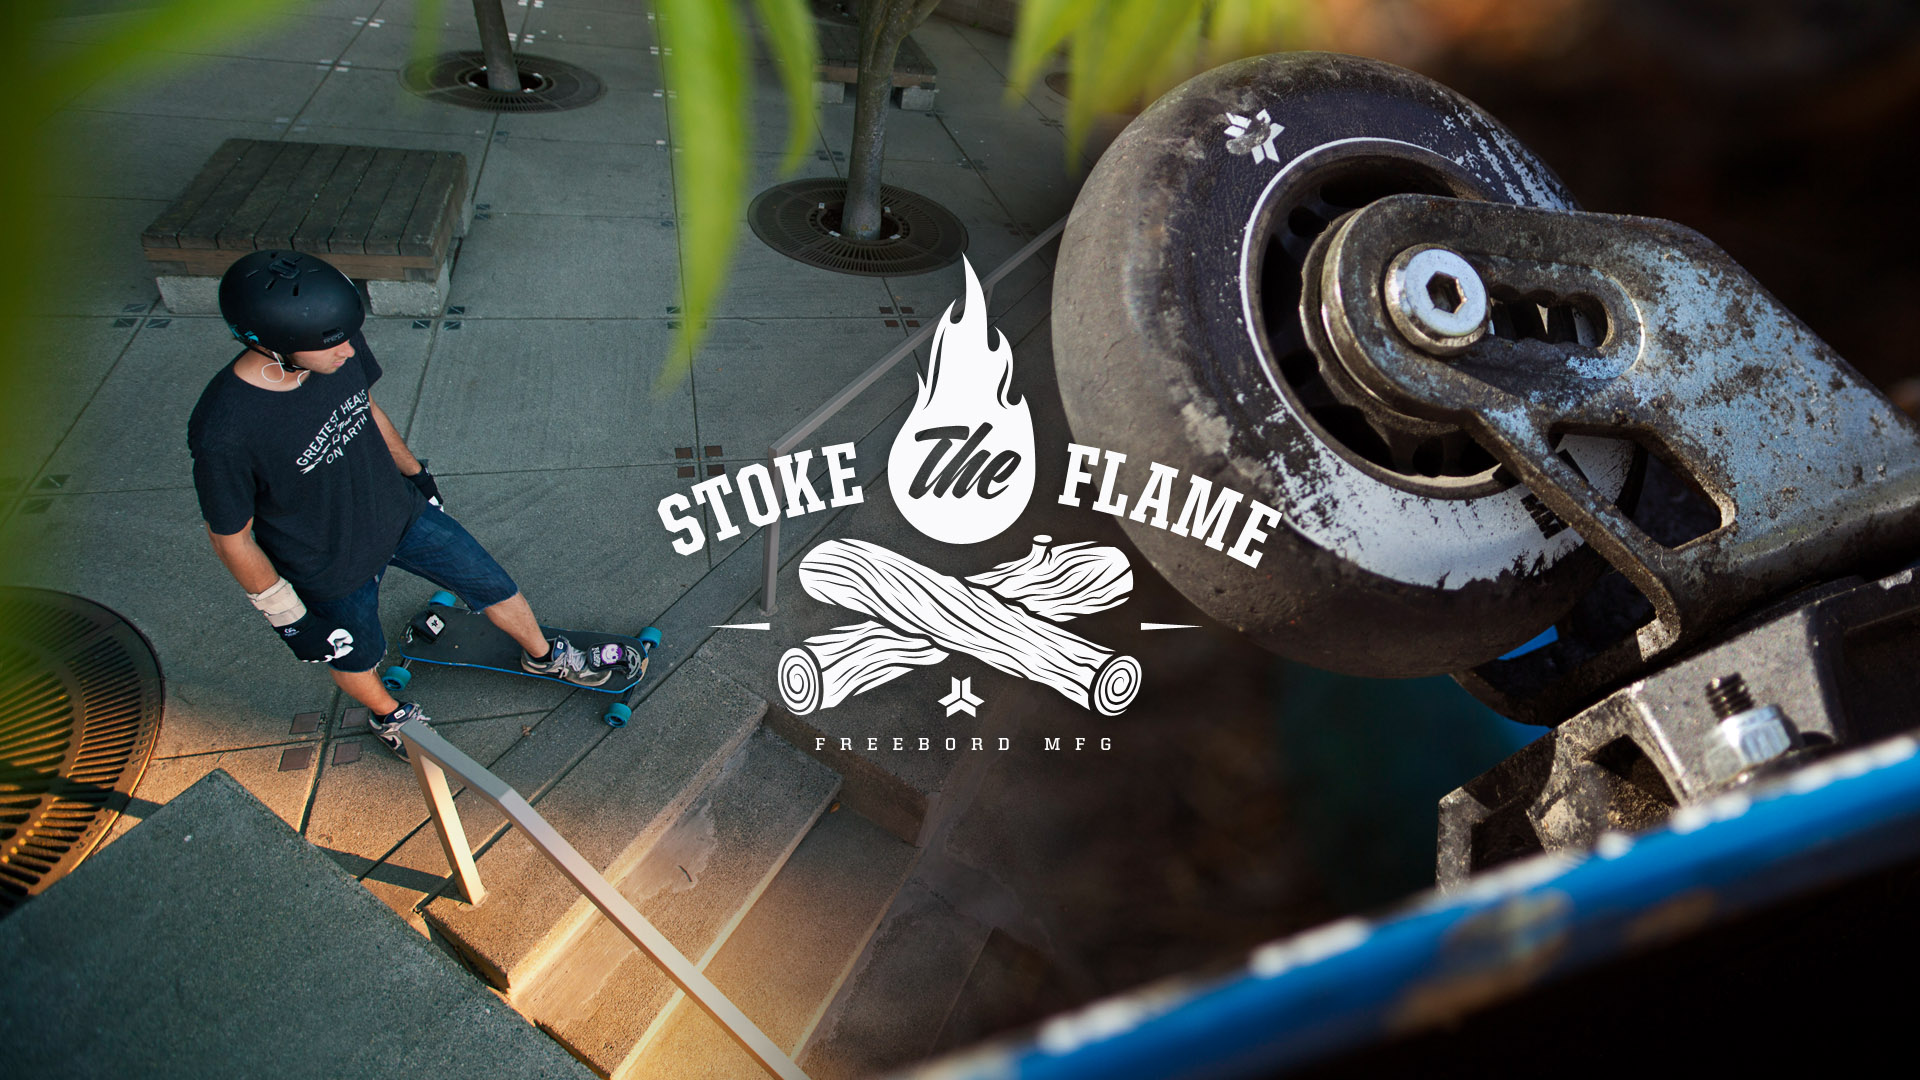 2014 Team Video “Stoke The Flame” Trailer